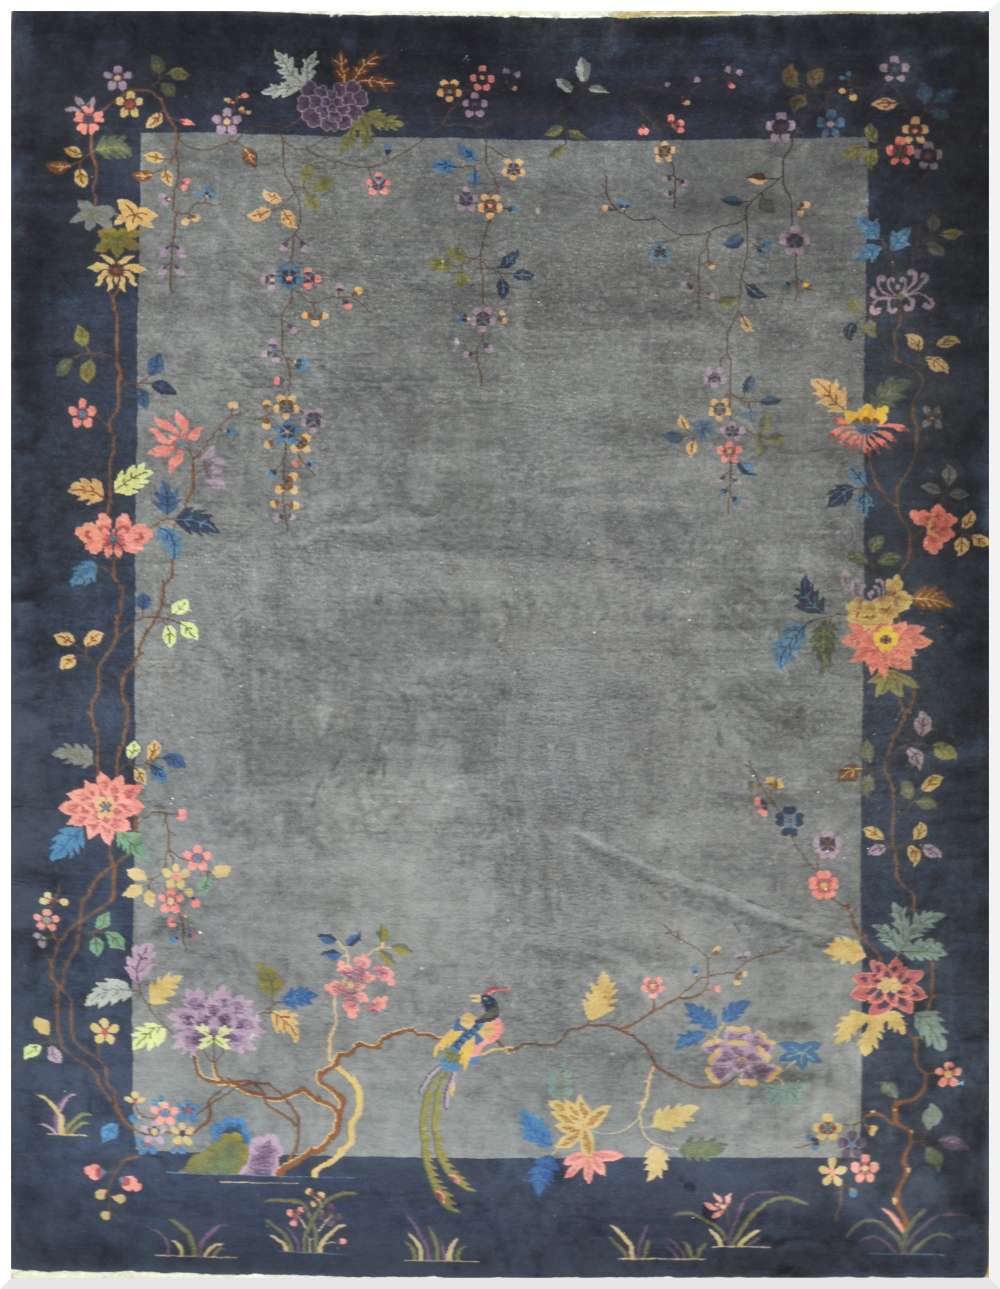 Antique Chinese Art Deco Rug In Atlanta, Chinese Art Deco Rugs